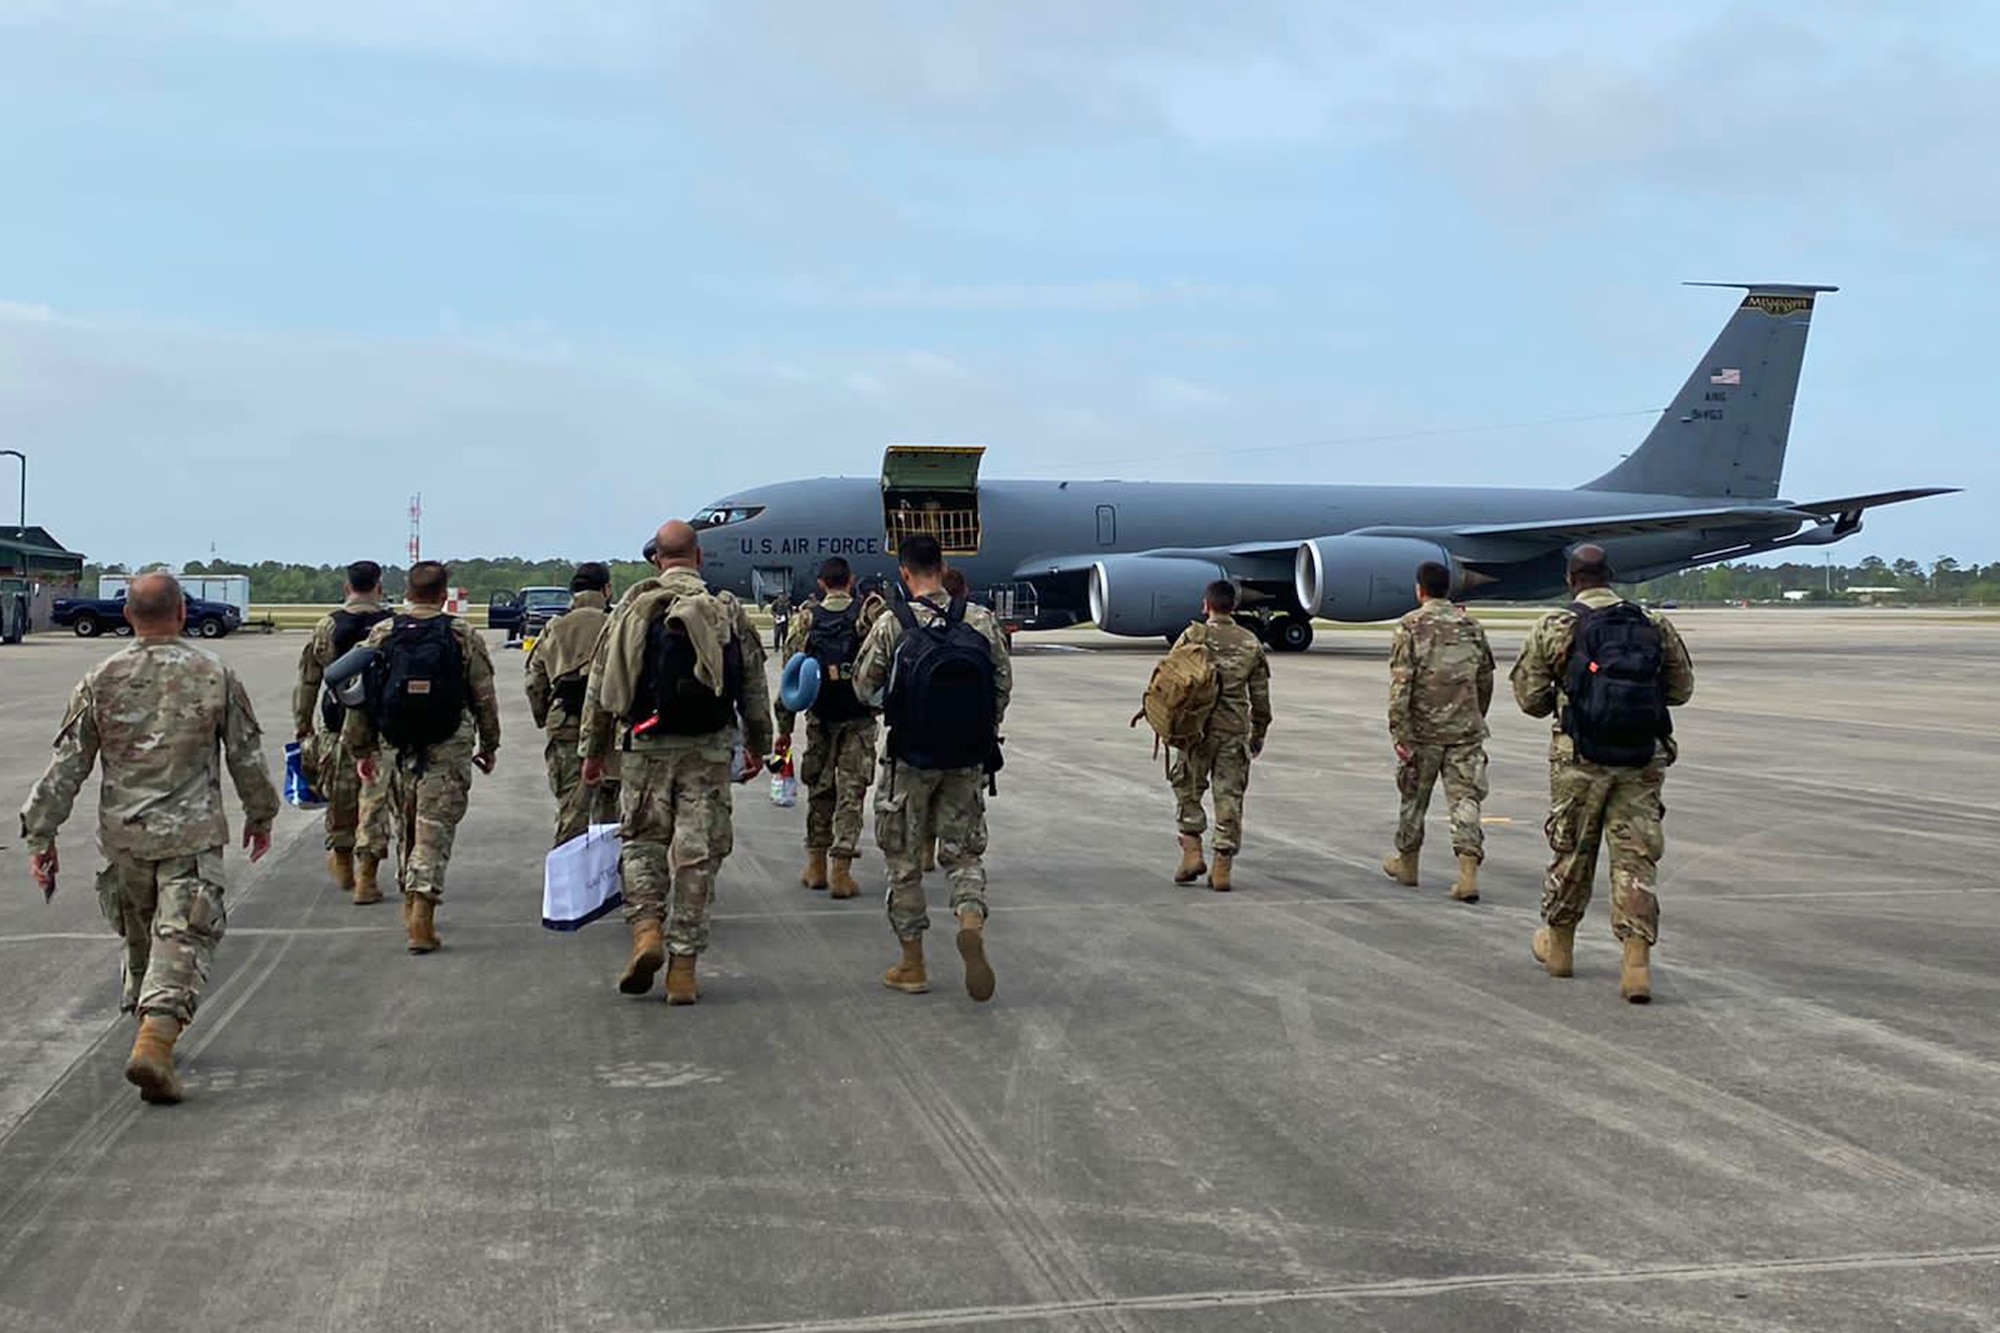 Airmen from the 141st Air Control Squadron, Puerto Rico Air National Guard, prepare to depart to Gulfport, Mississippi, at Muniz Air National Guard Base, Carolina, Puerto Rico, April 14, 2021. The Airmen participated in the Southern Strike exercise in Gulfport April 15-29.